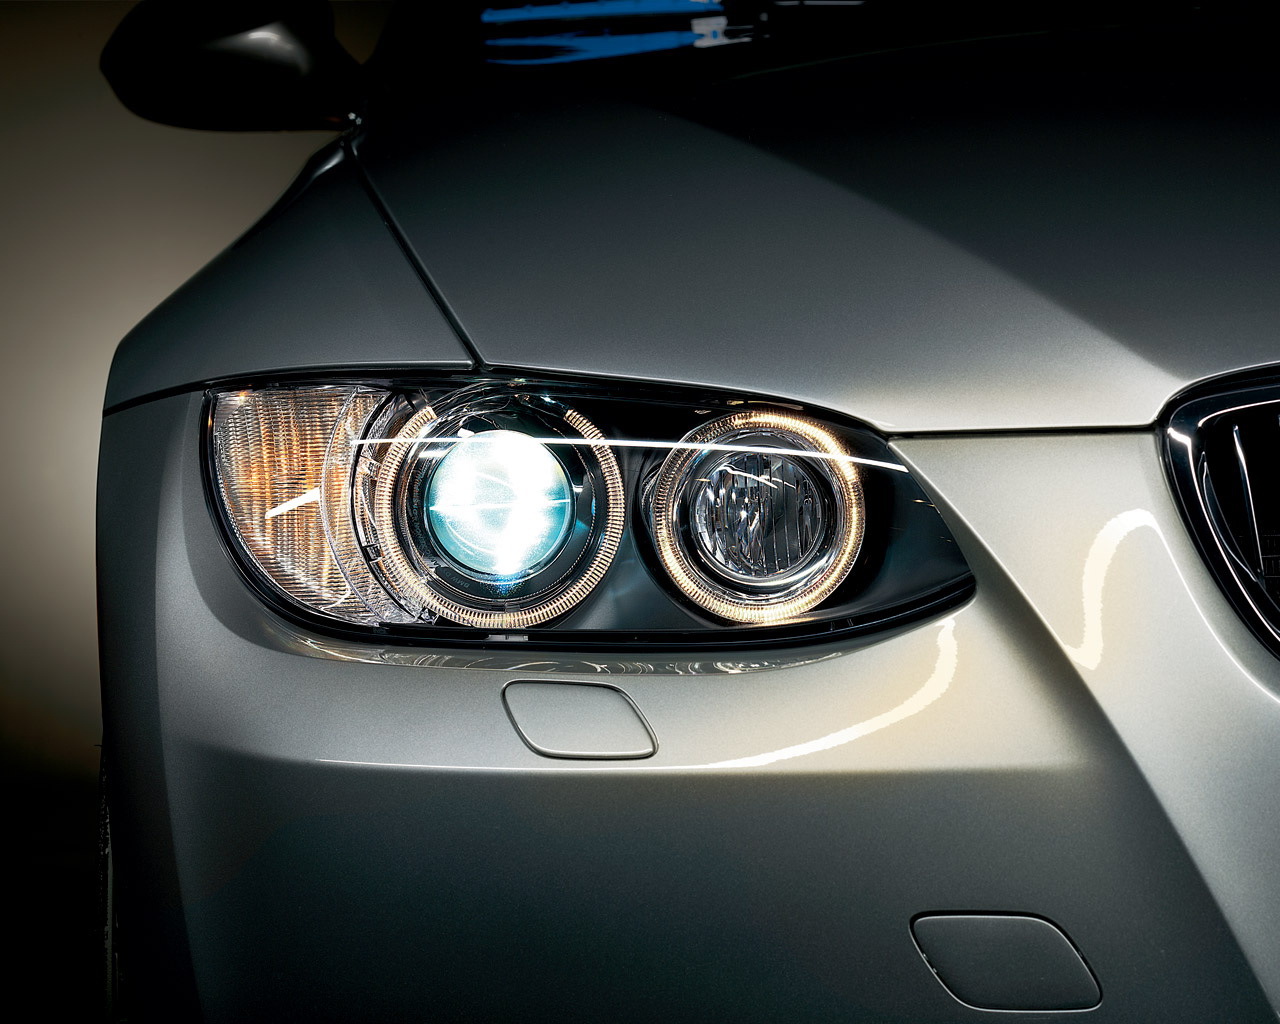 The silver car headlight wallpapers and images - wallpapers, pictures